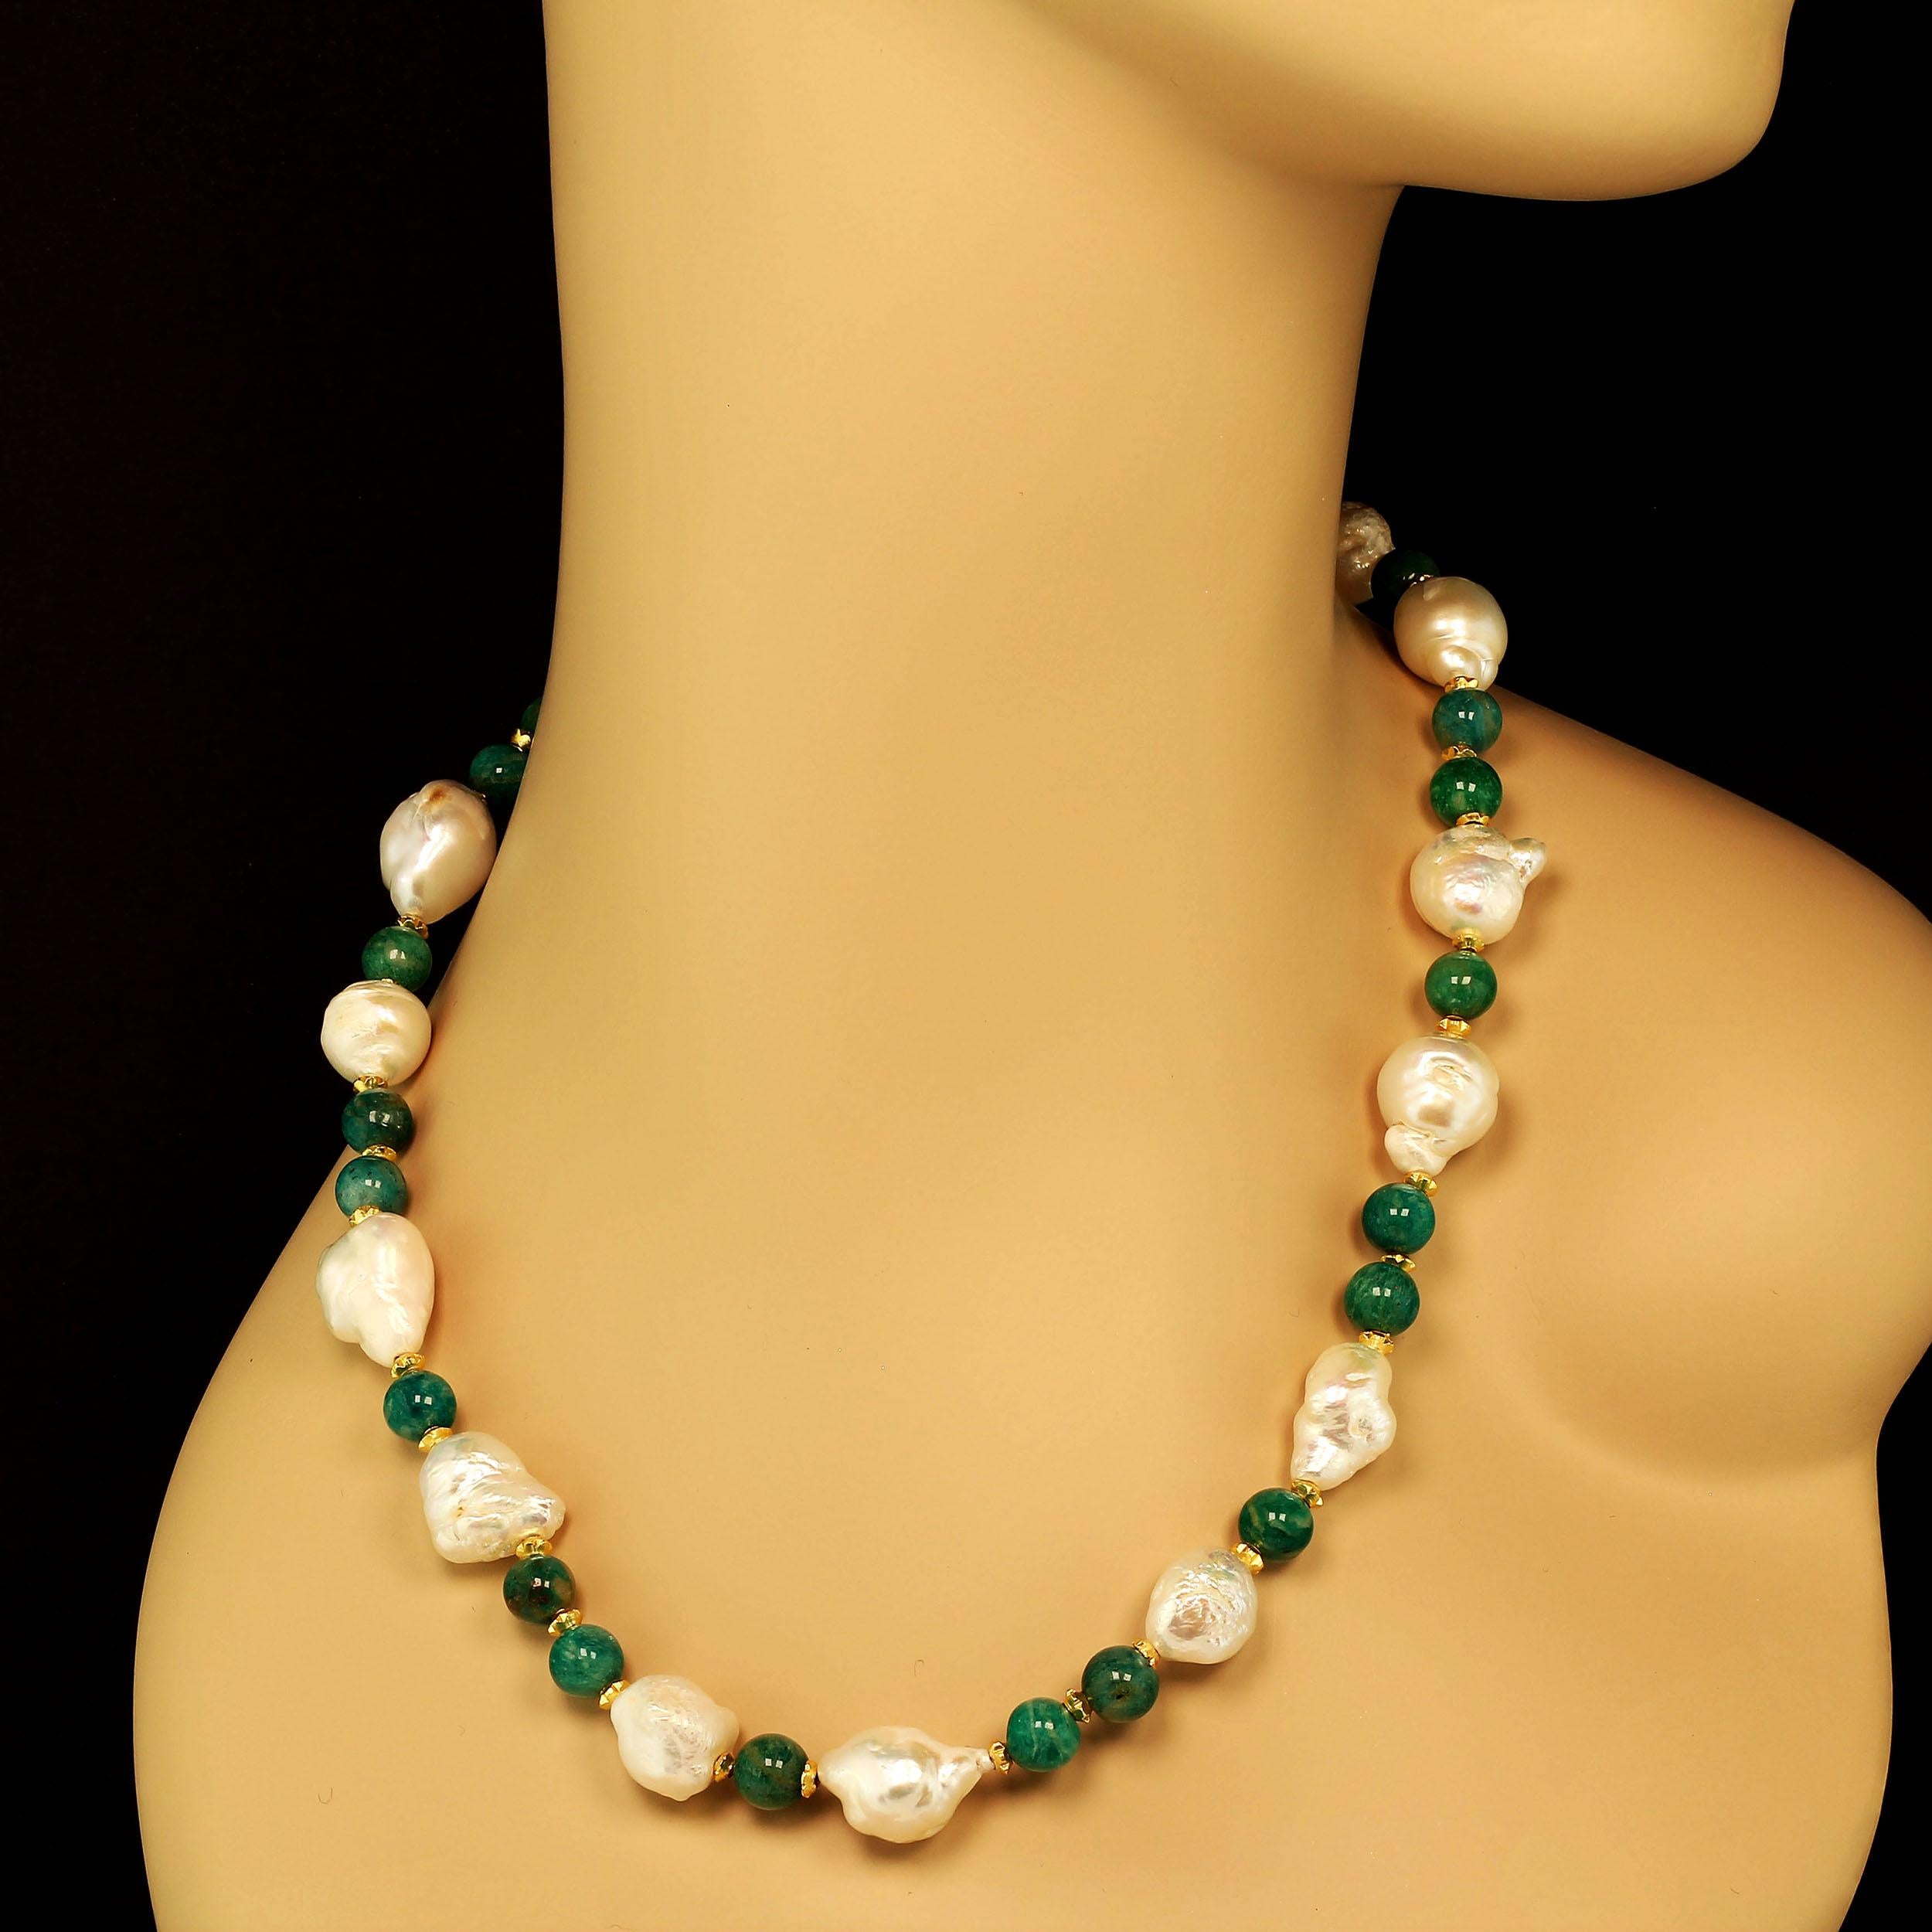 Own the jewelry you deserve

Custom made, fun and funky necklace of white Freshwater Pearls and highly polished 8 MM Amazonite.  It's an unbeatable combination in this 28 inch necklace.  The Pearls and Amazonite have gold tone accents and this